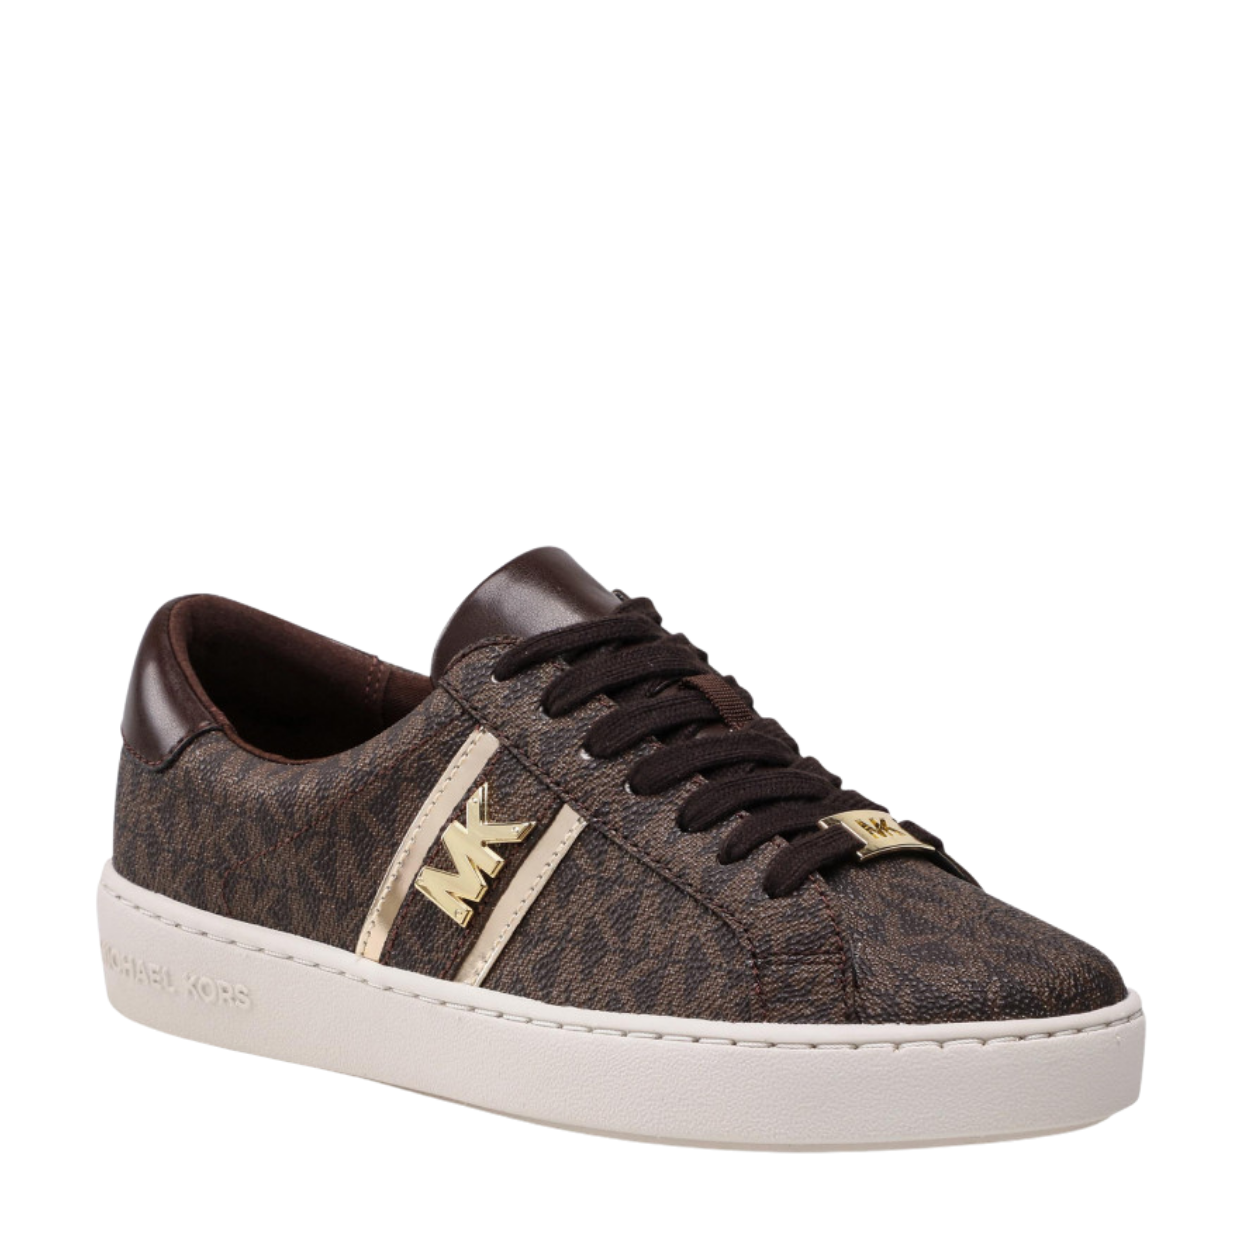 Michael Kors Irving Lace Up Trainers